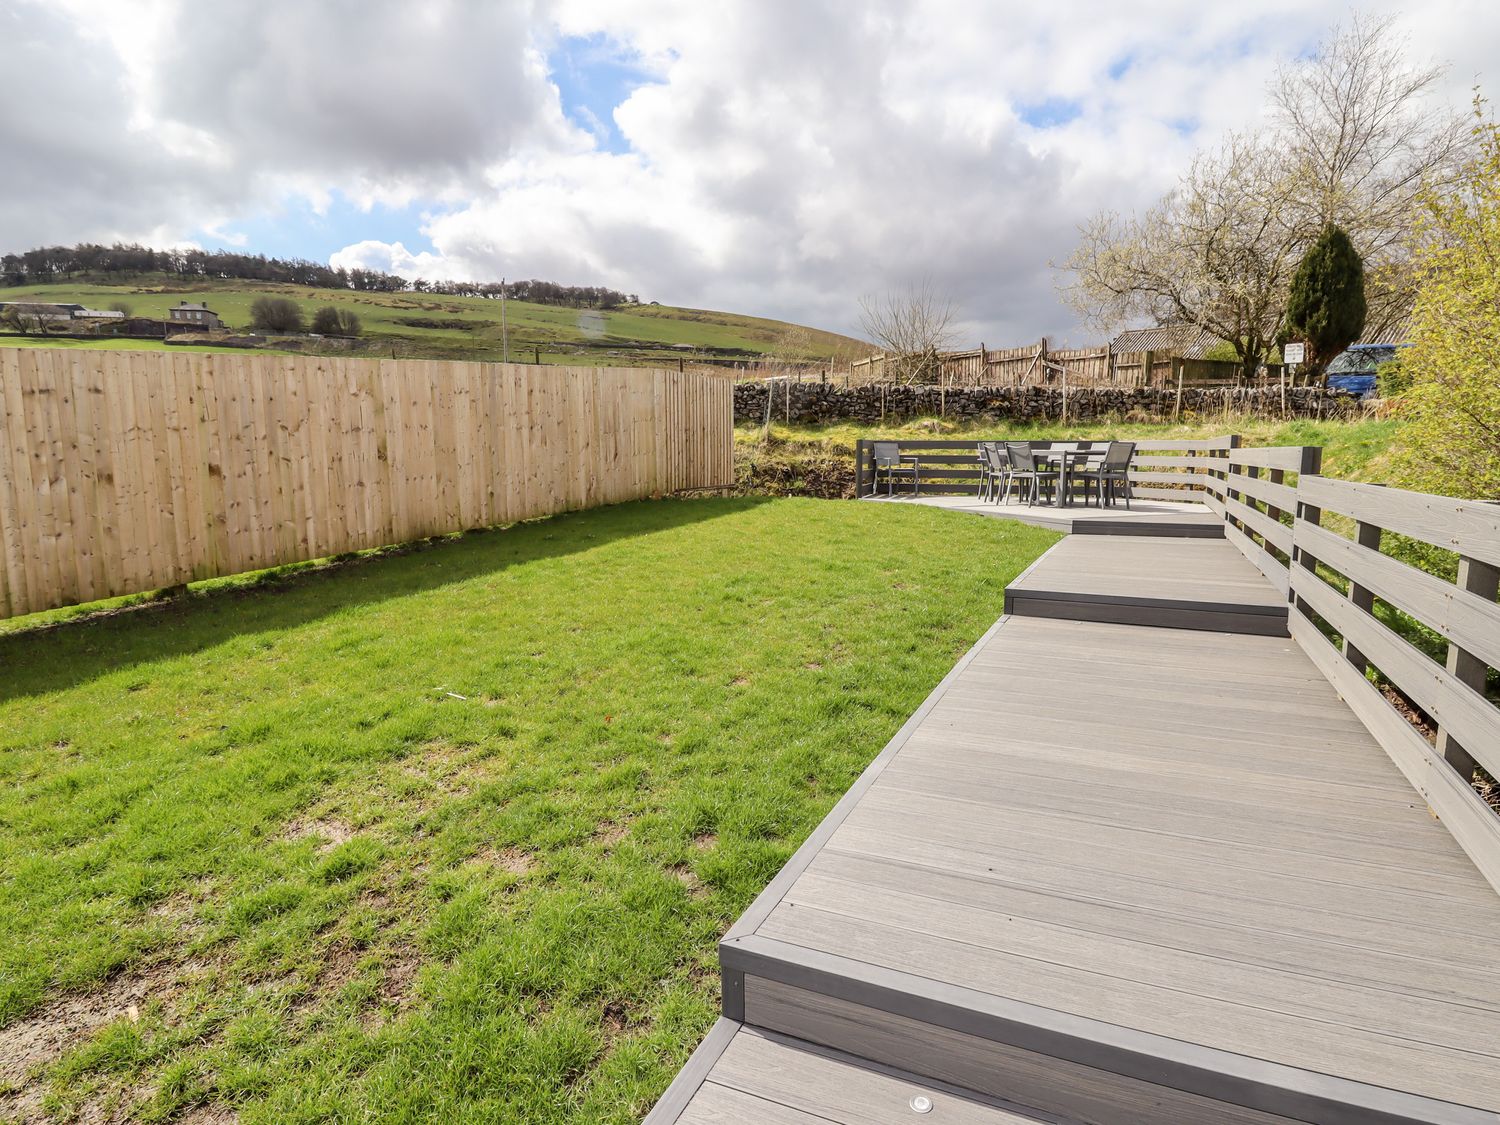 Cheshire View in Buxton, Derbyshire. 4 bedroom home with hot tub, enclosed garden, and chic interior